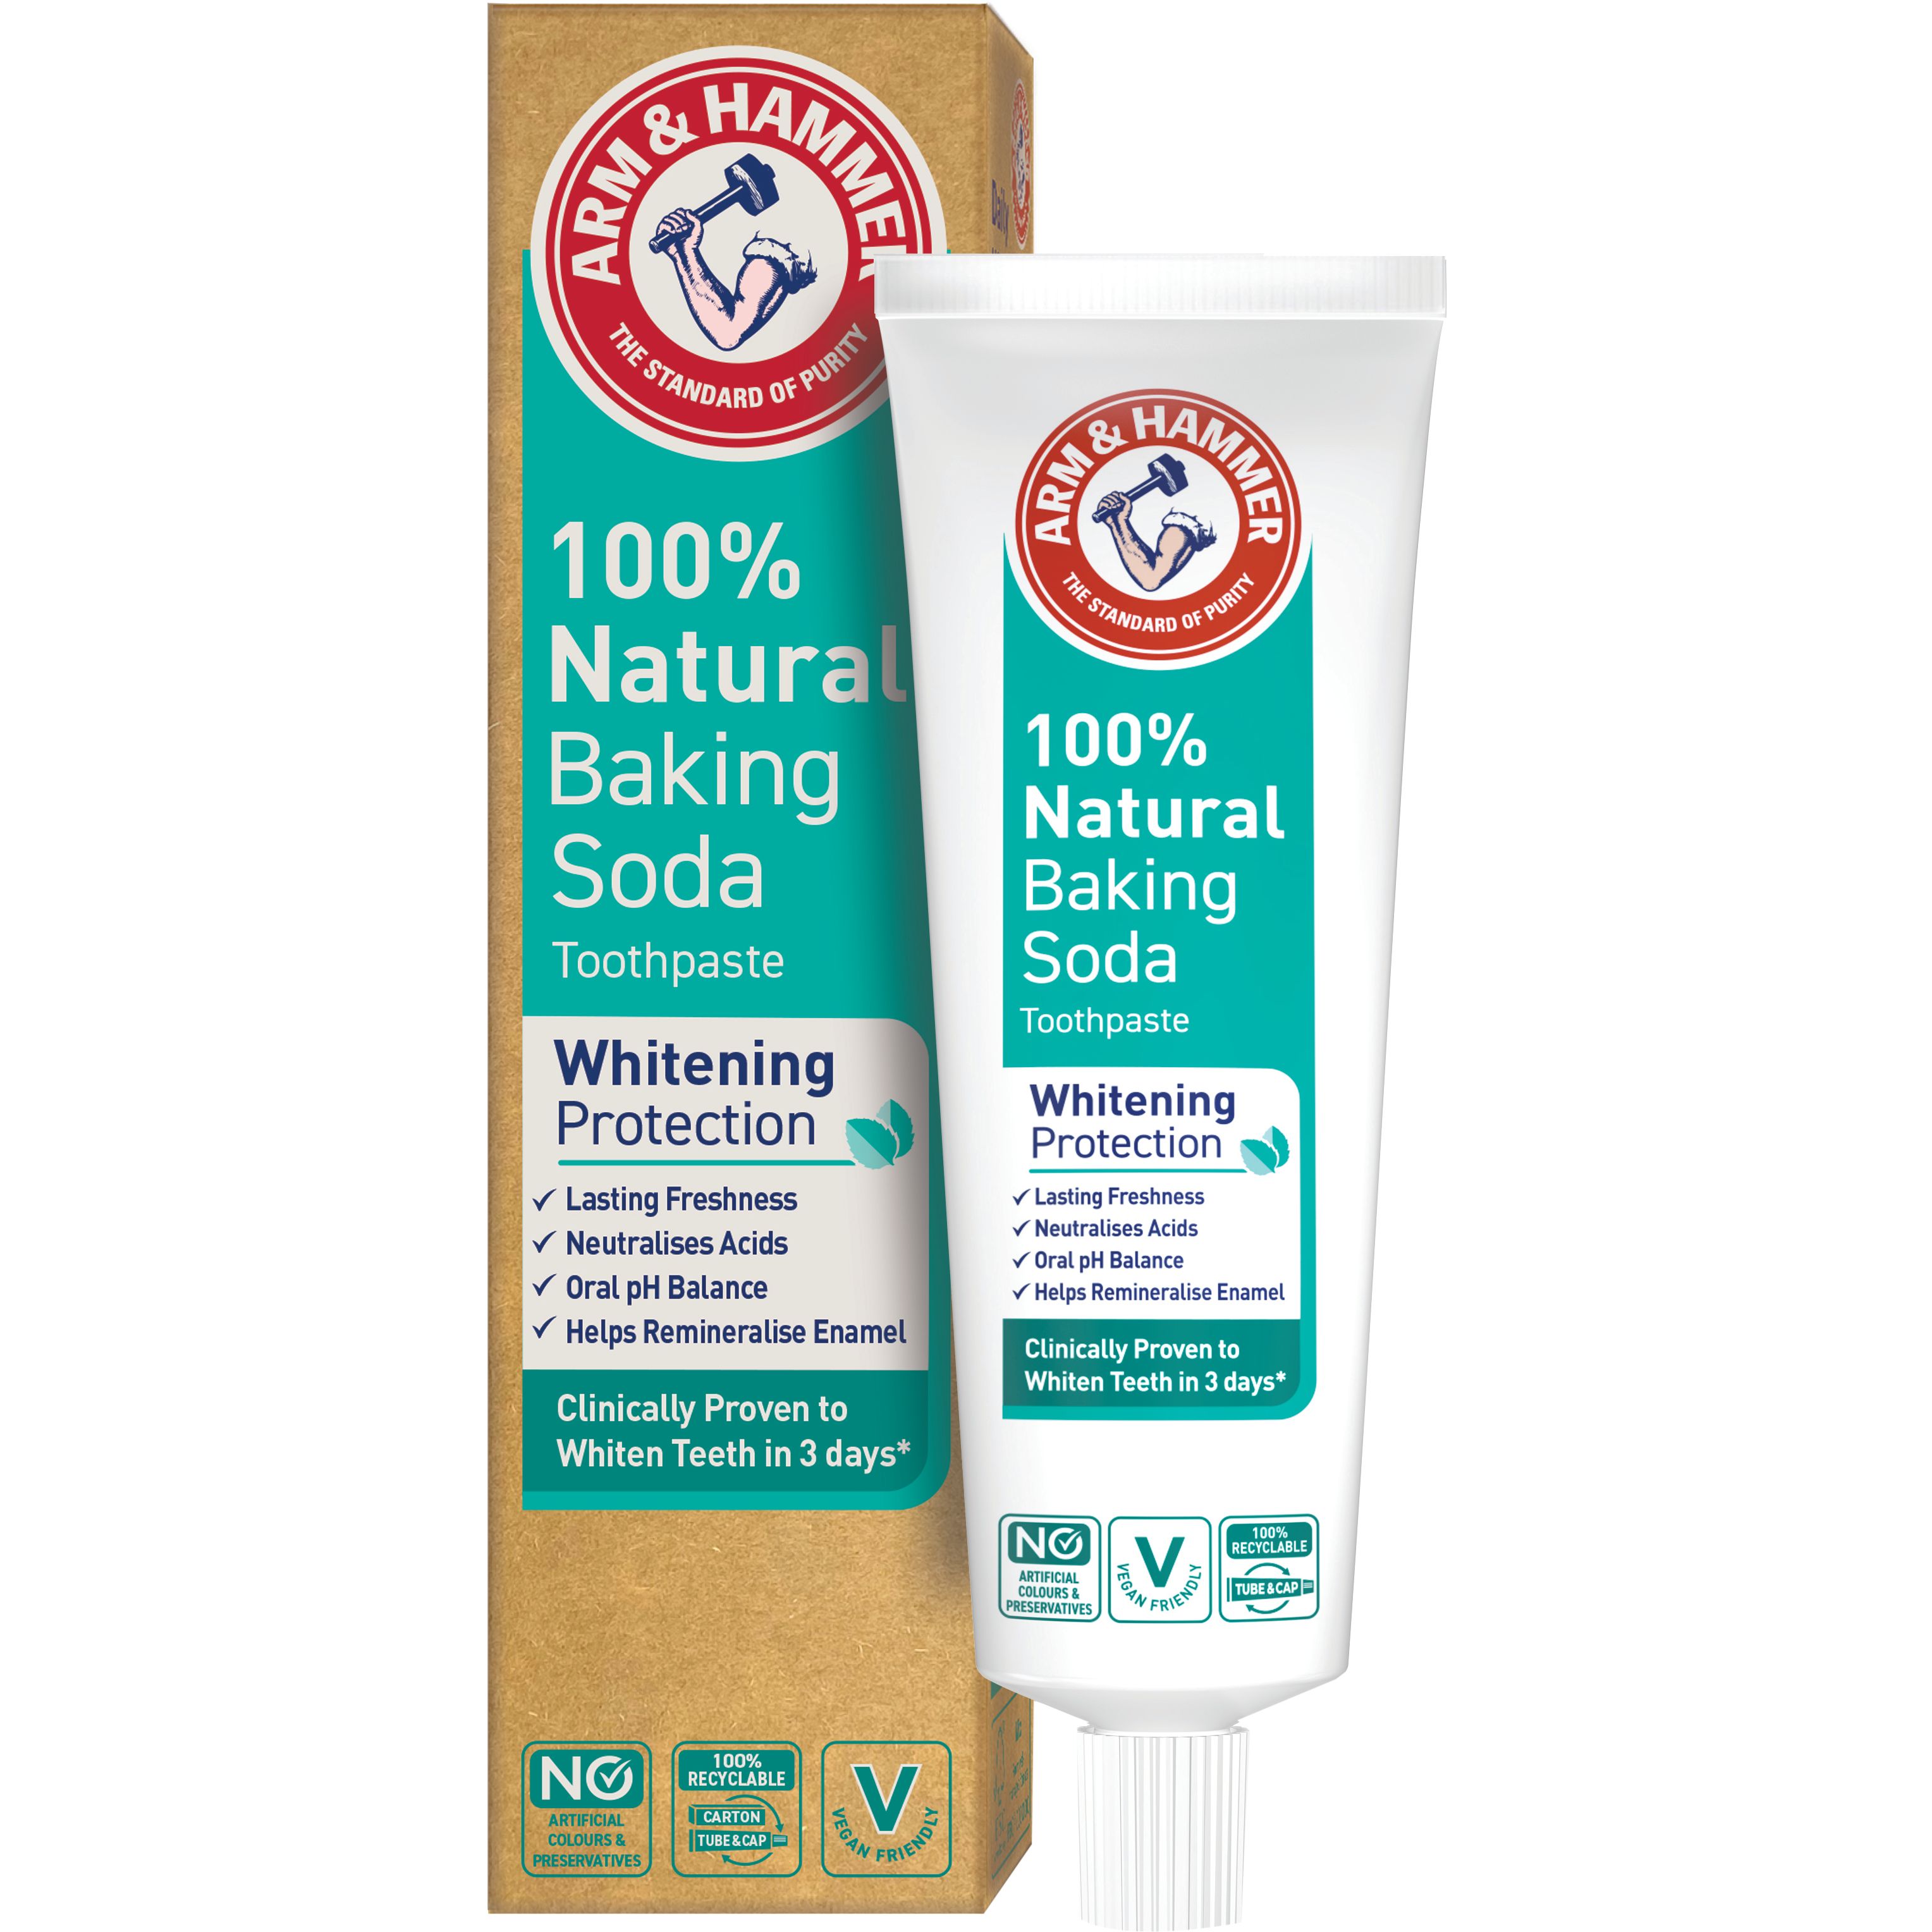 Зубна паста Arm&Hammer 100% Natural Baking Soda Toothpaste 75 мл - фото 1